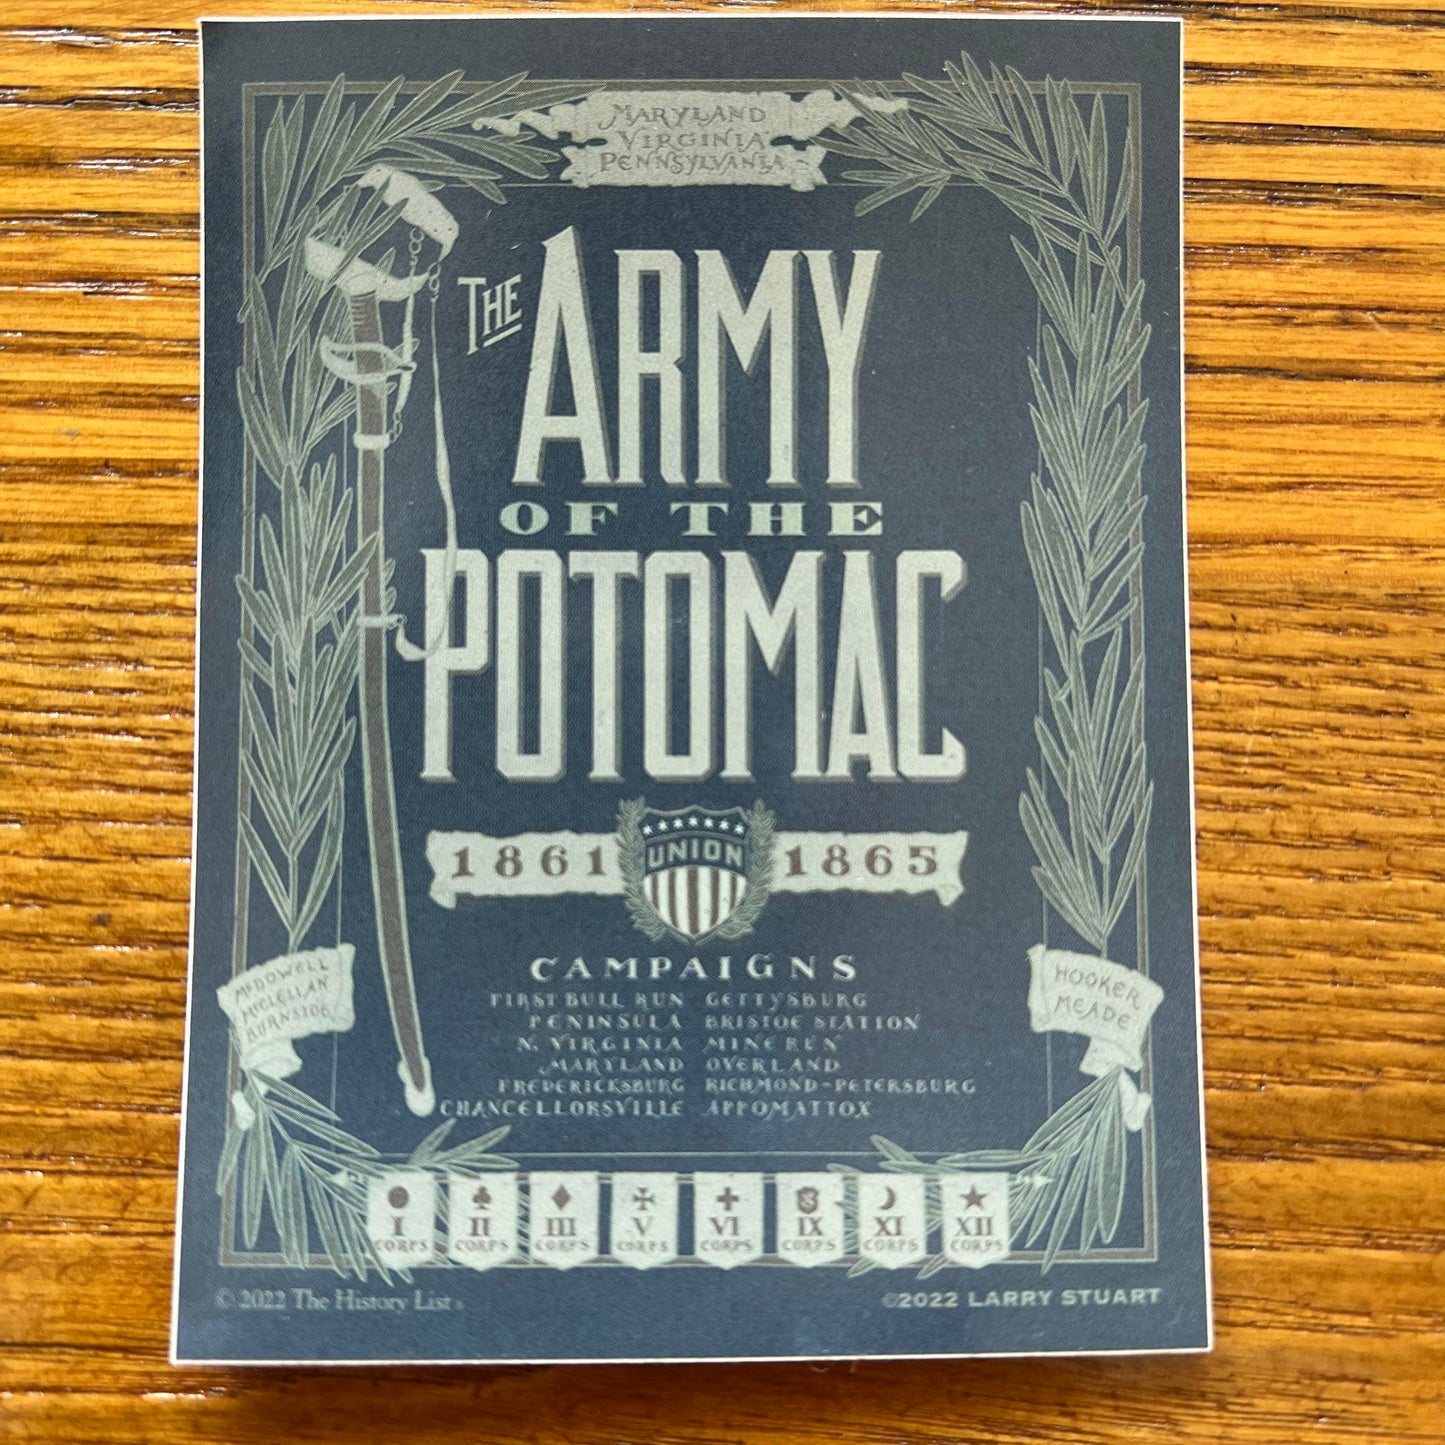 "The Army of the Potomac" Sticker